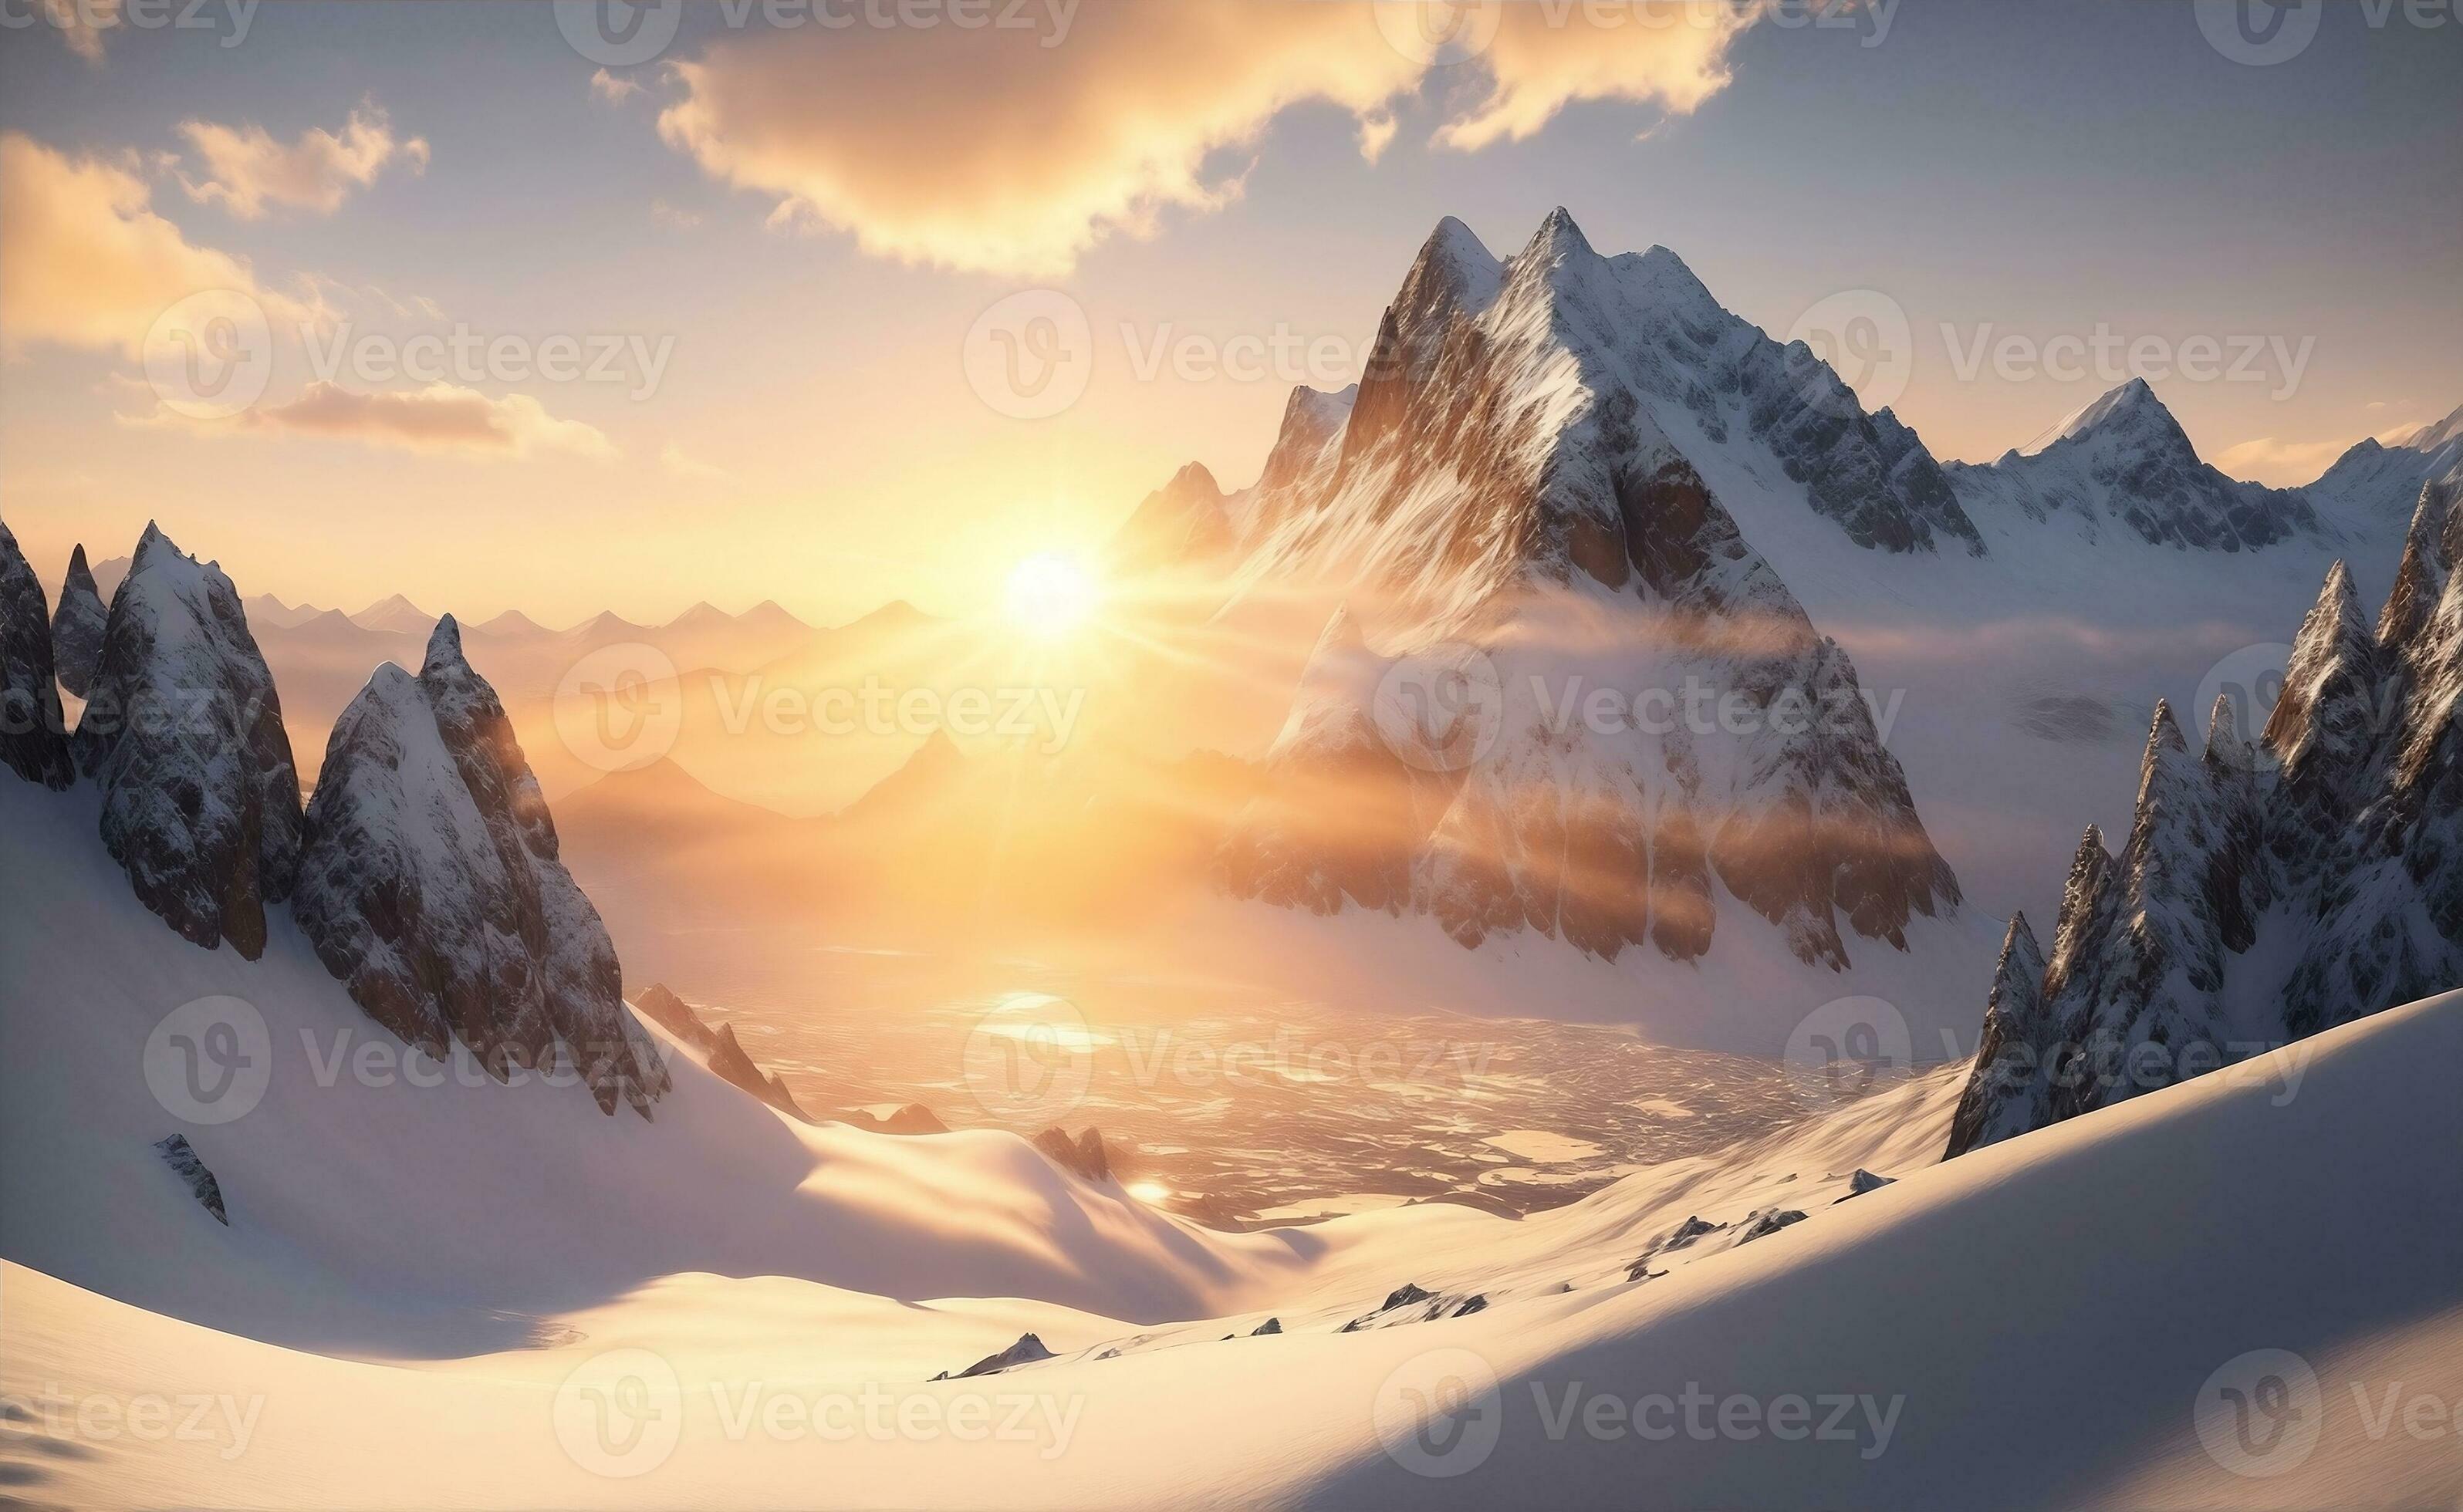 Snowy Mountains and Hills Background Pack